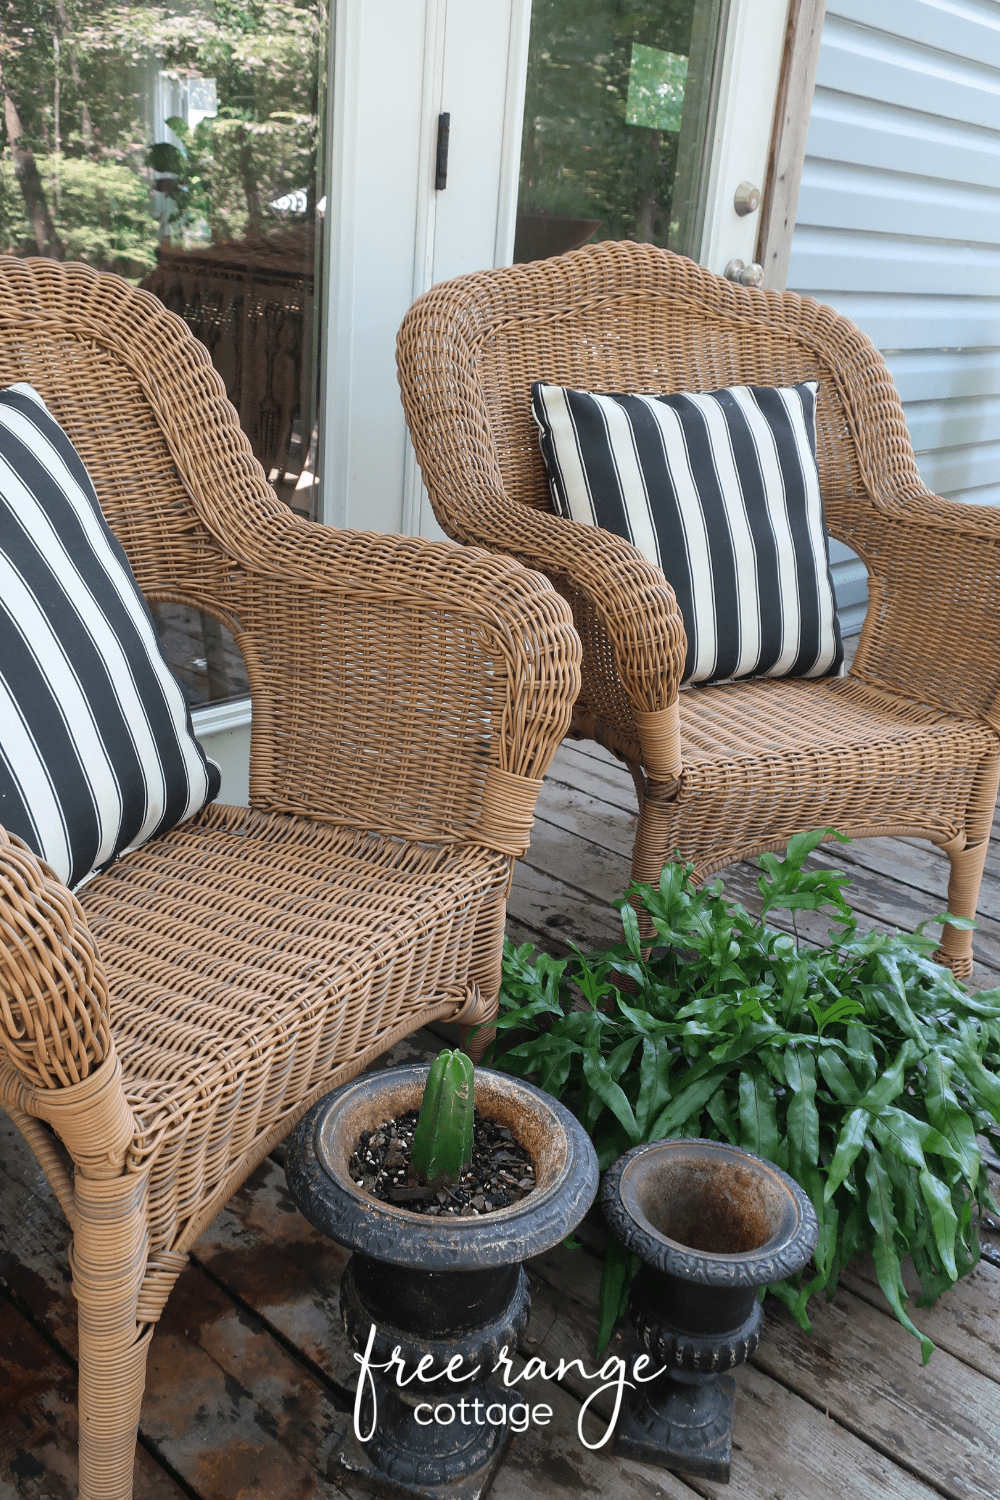 Wicker patio chairs with black and white pillows